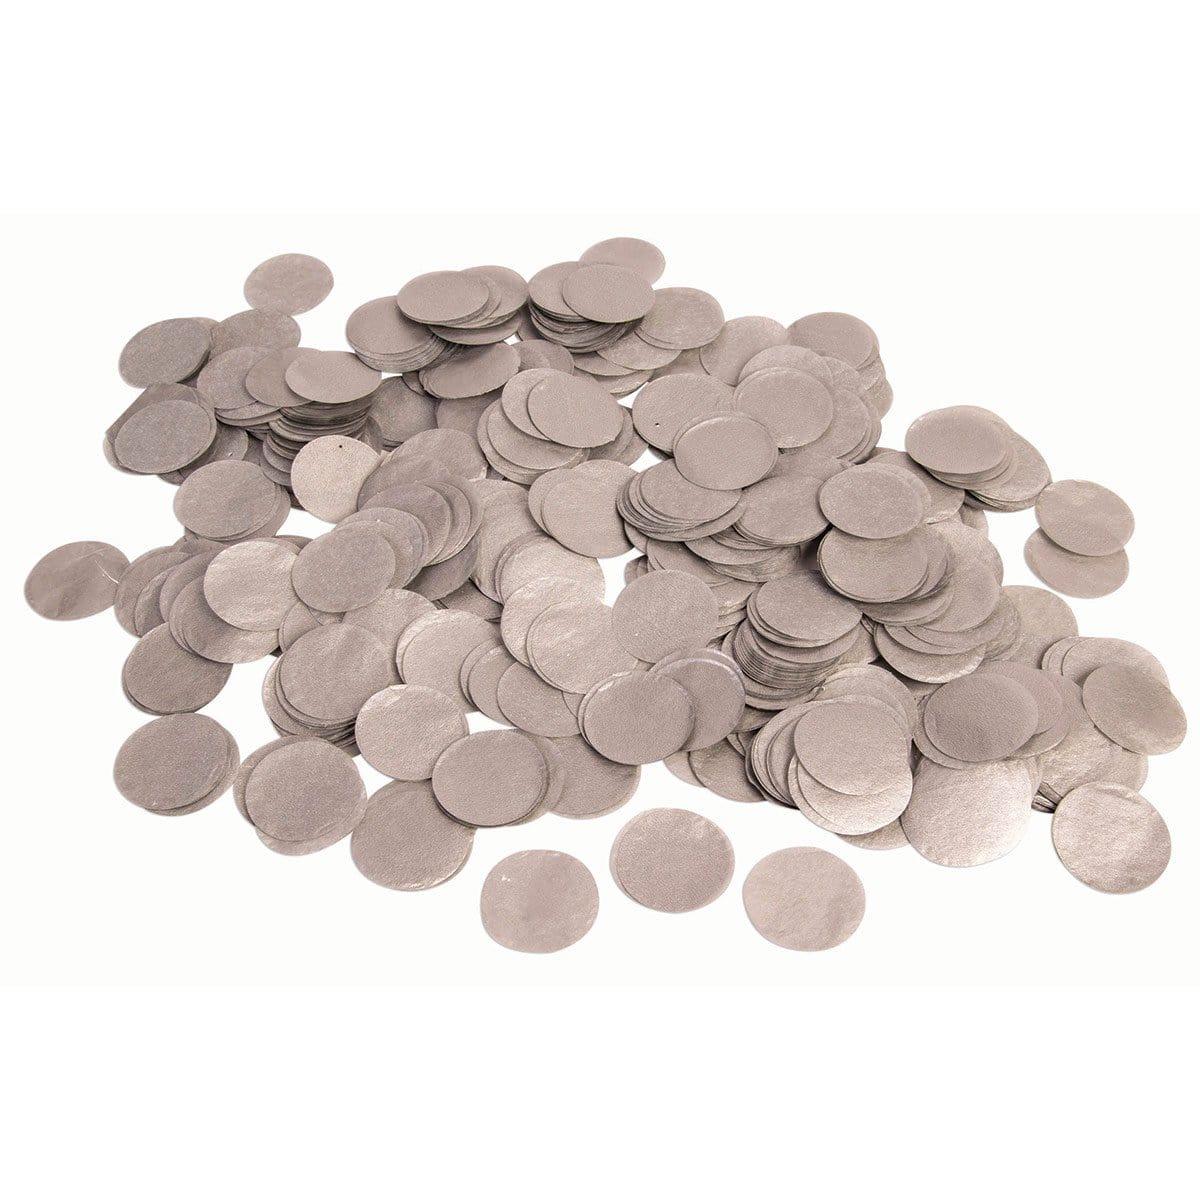 Buy Balloons Silver Paper Confetti, 0.8 Ounce sold at Party Expert